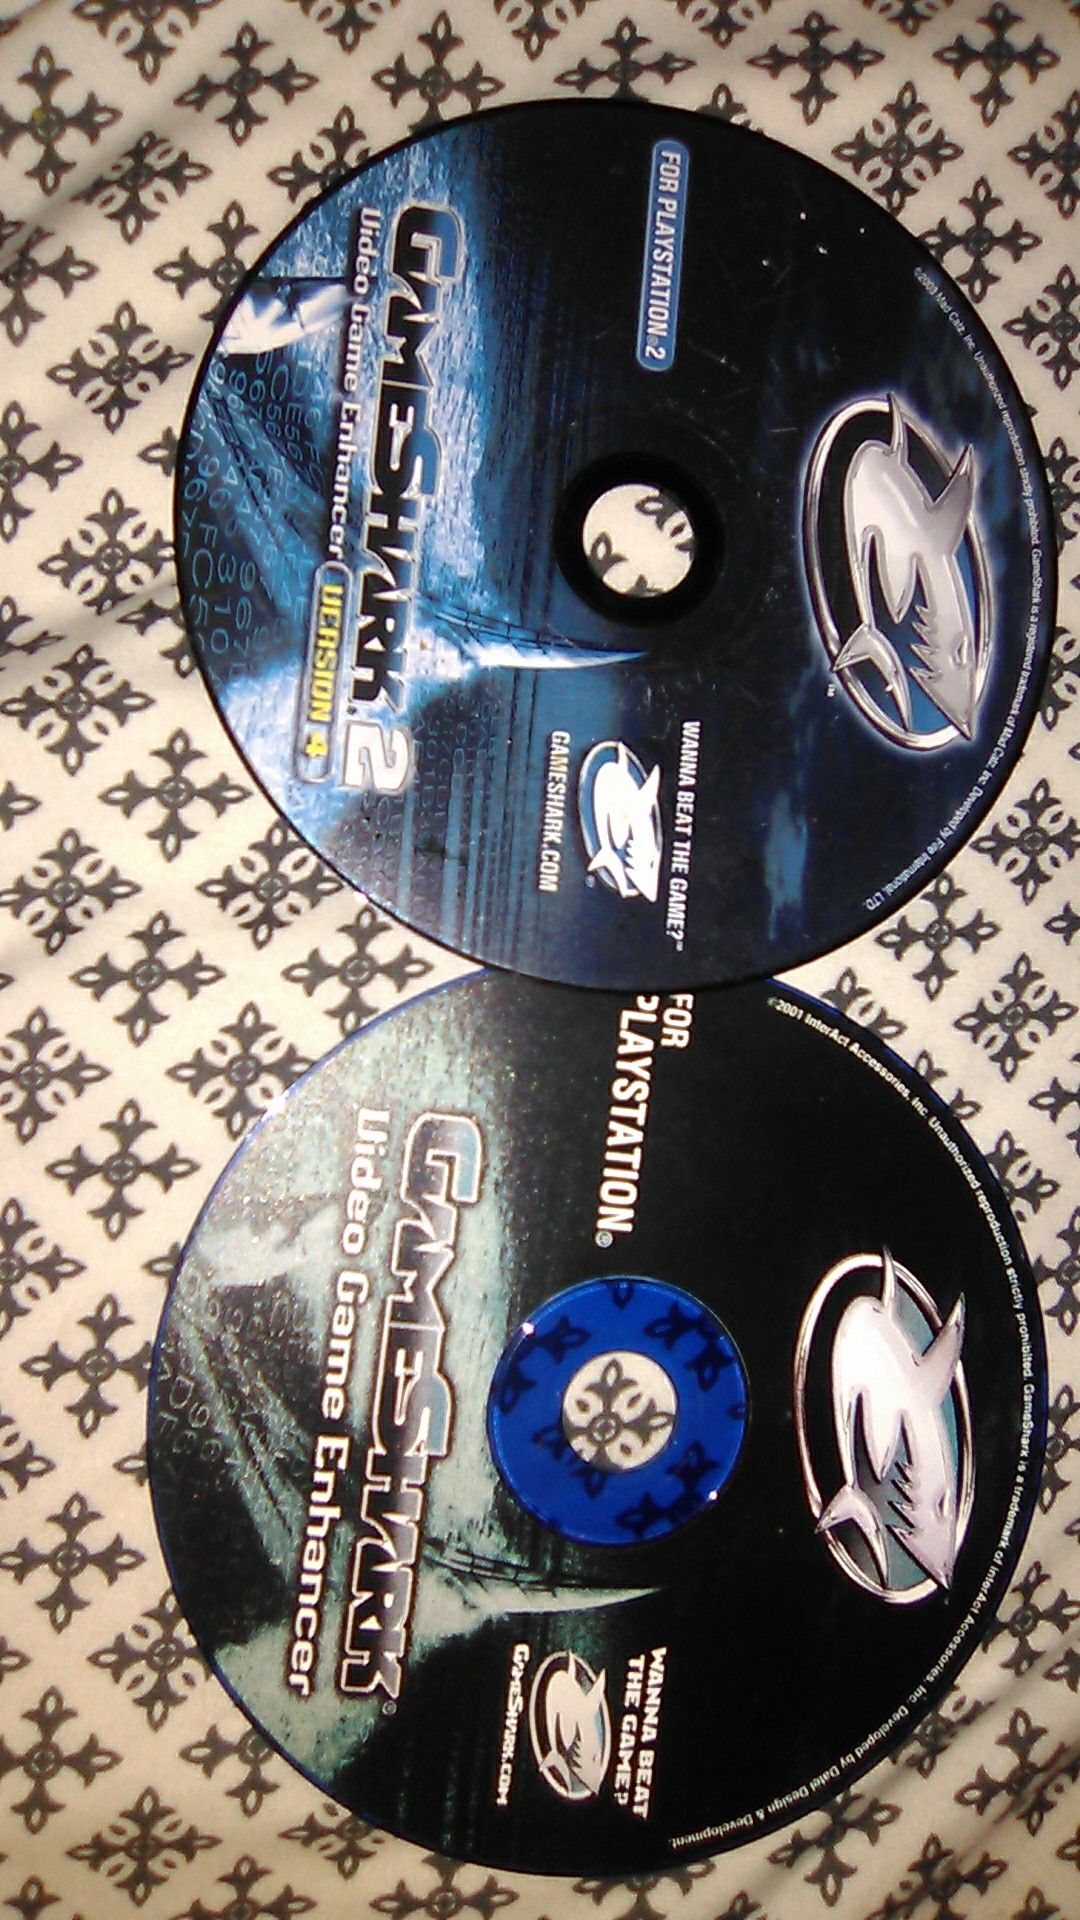 GameShark for PS1 and GameShark for PS2